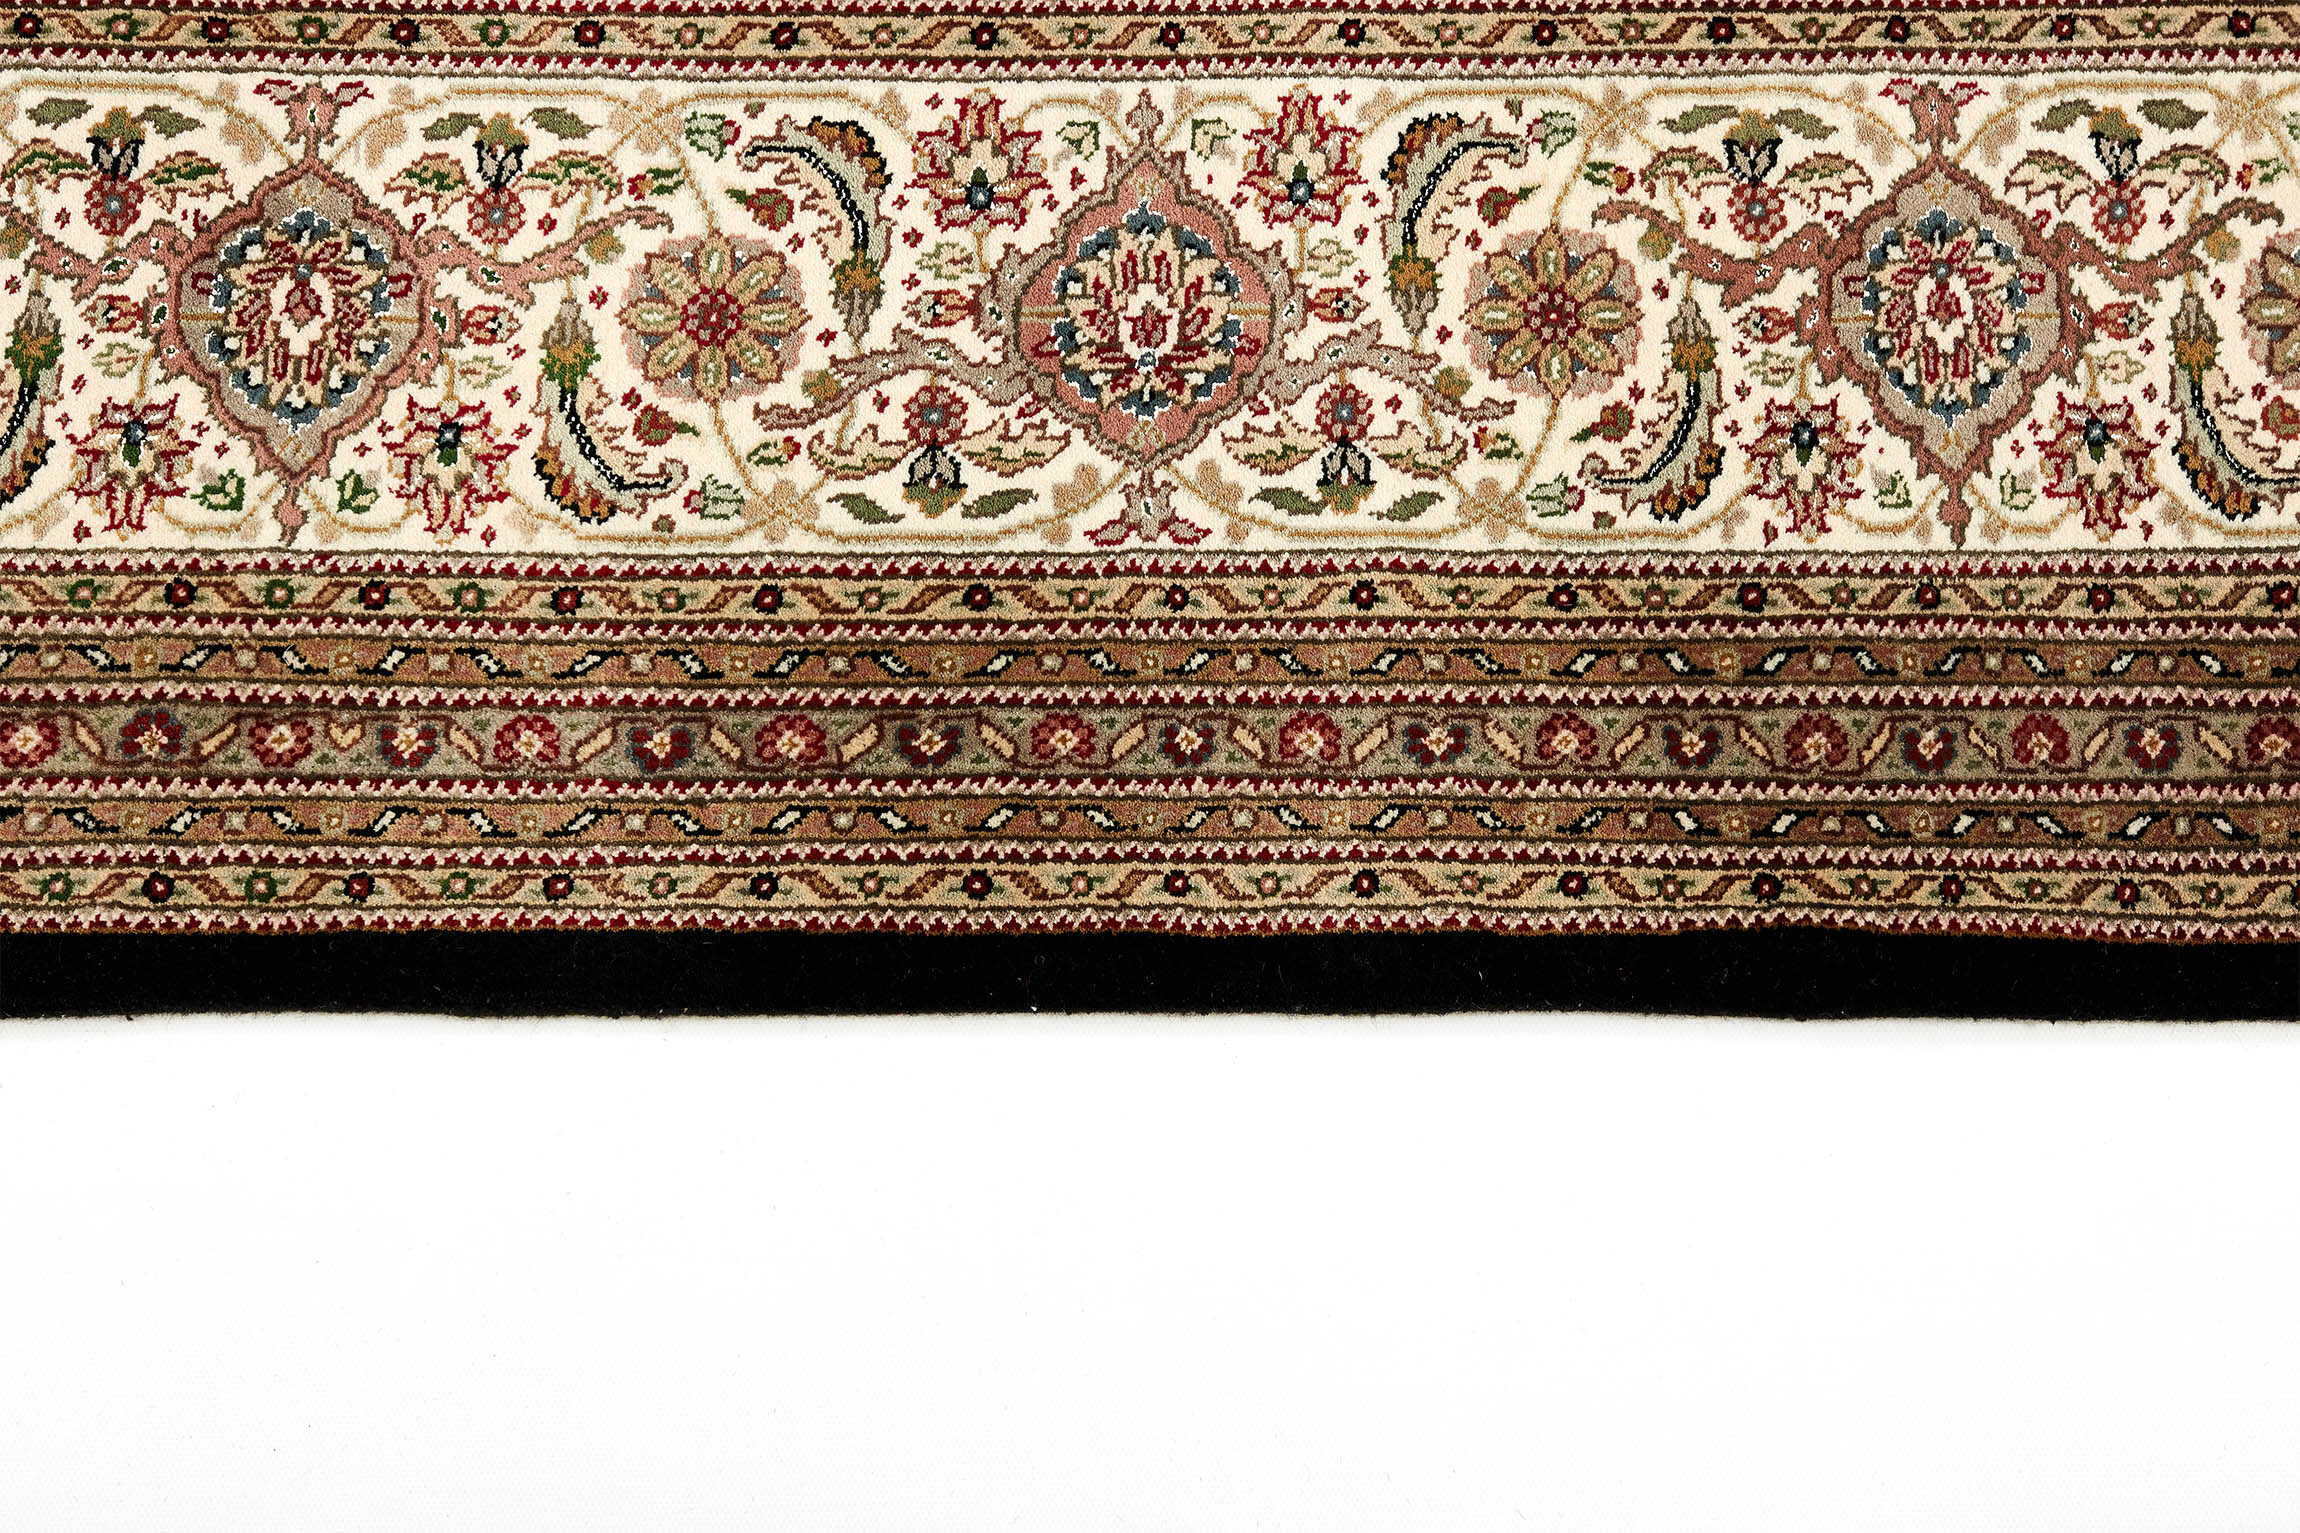 Authentic Oriental rug with traditional geometric and floral design in red